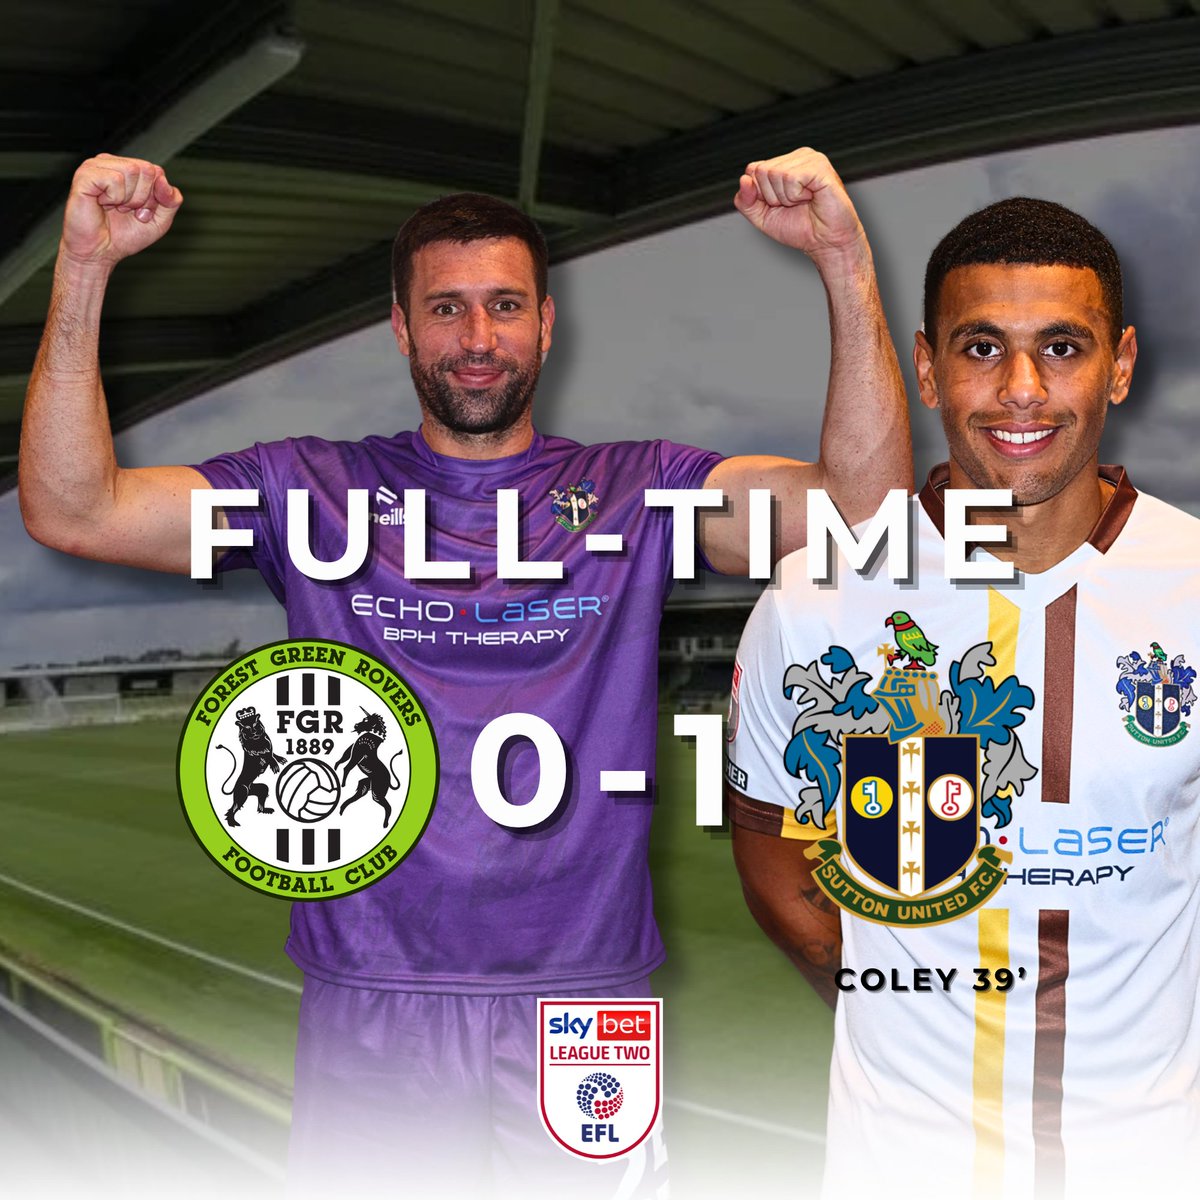 ⏱️ 𝗙𝗨𝗟𝗟-𝗧𝗜𝗠𝗘 | 0-1 A massive result on the road. Battled from the first minute to last! A special Coley strike the difference. ⚽️ Shoutout to our Amber Army of 278 for making the trip to Nailsworth. That one was for you. 💛 🟢 FGR 0-1 SUT ⚪️ #SuttonUnited